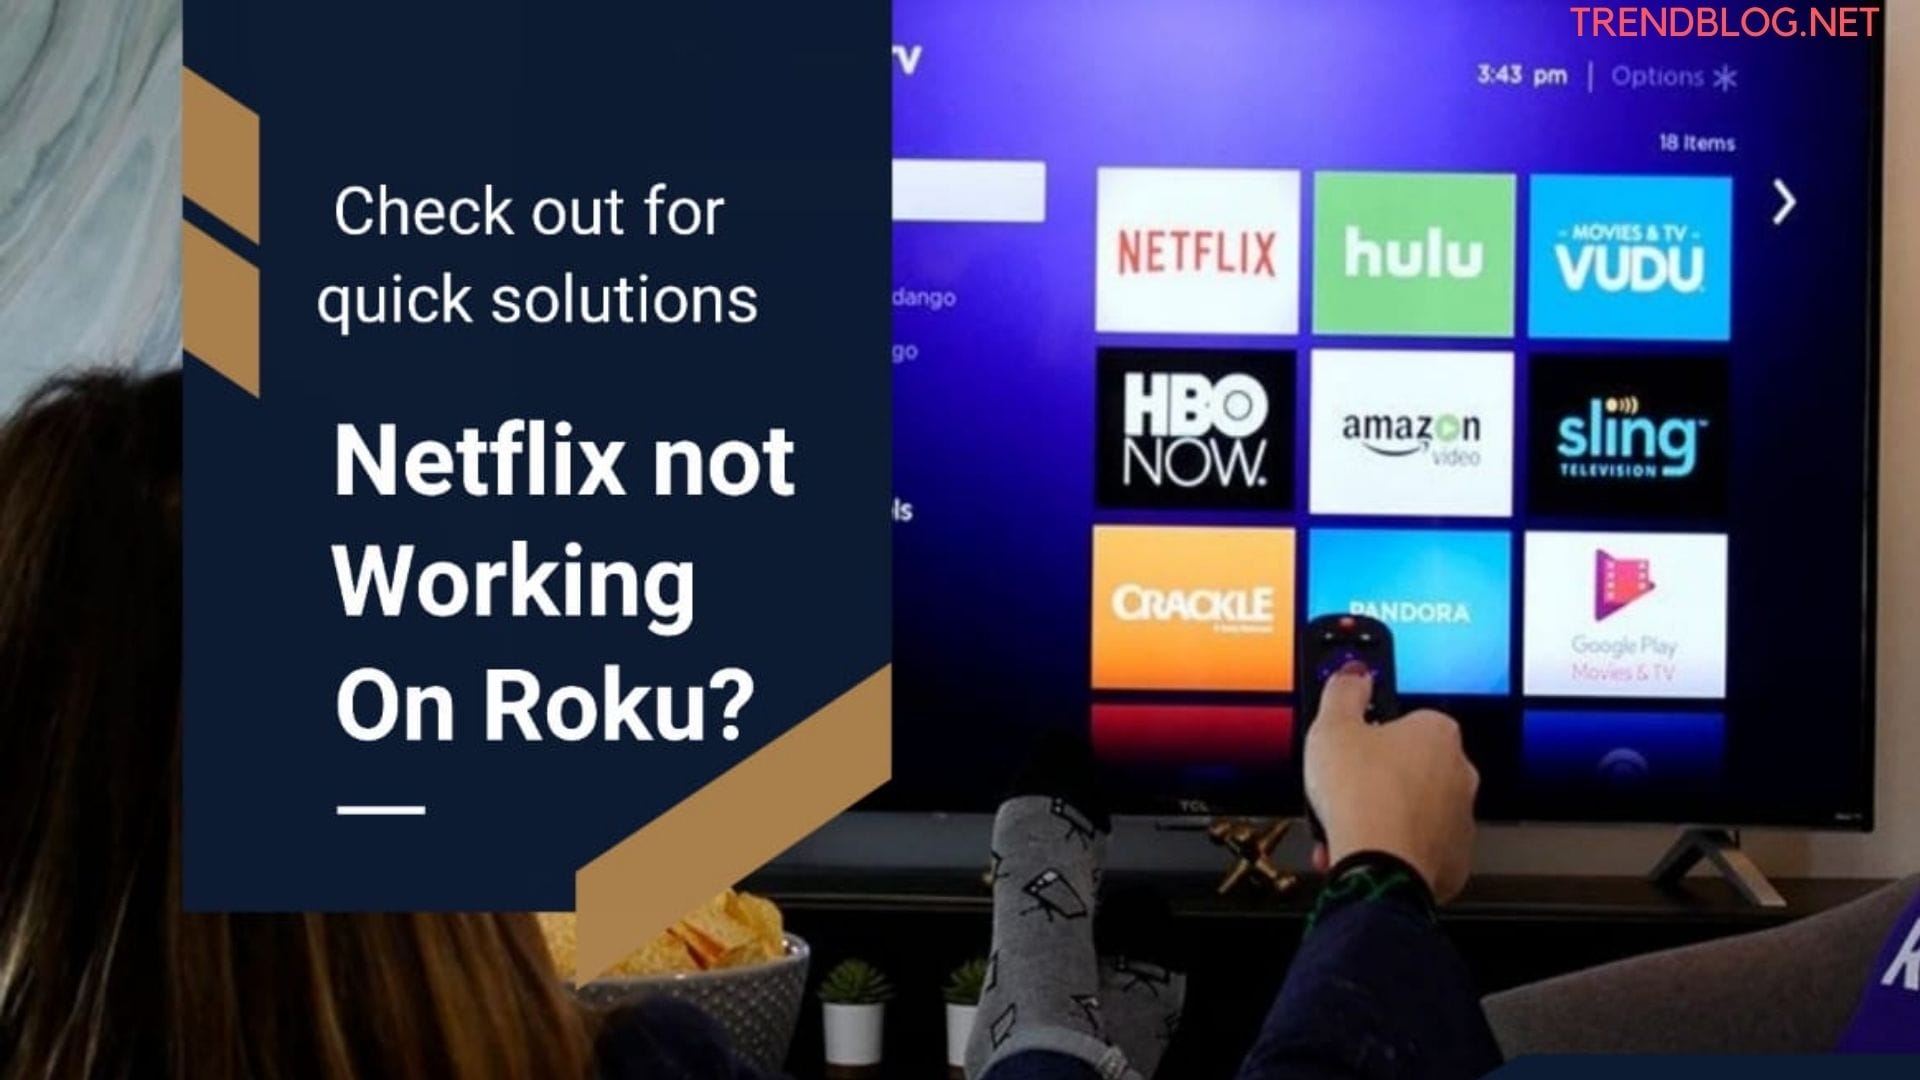  Netflix Not Working on Roku: Problem With Solution